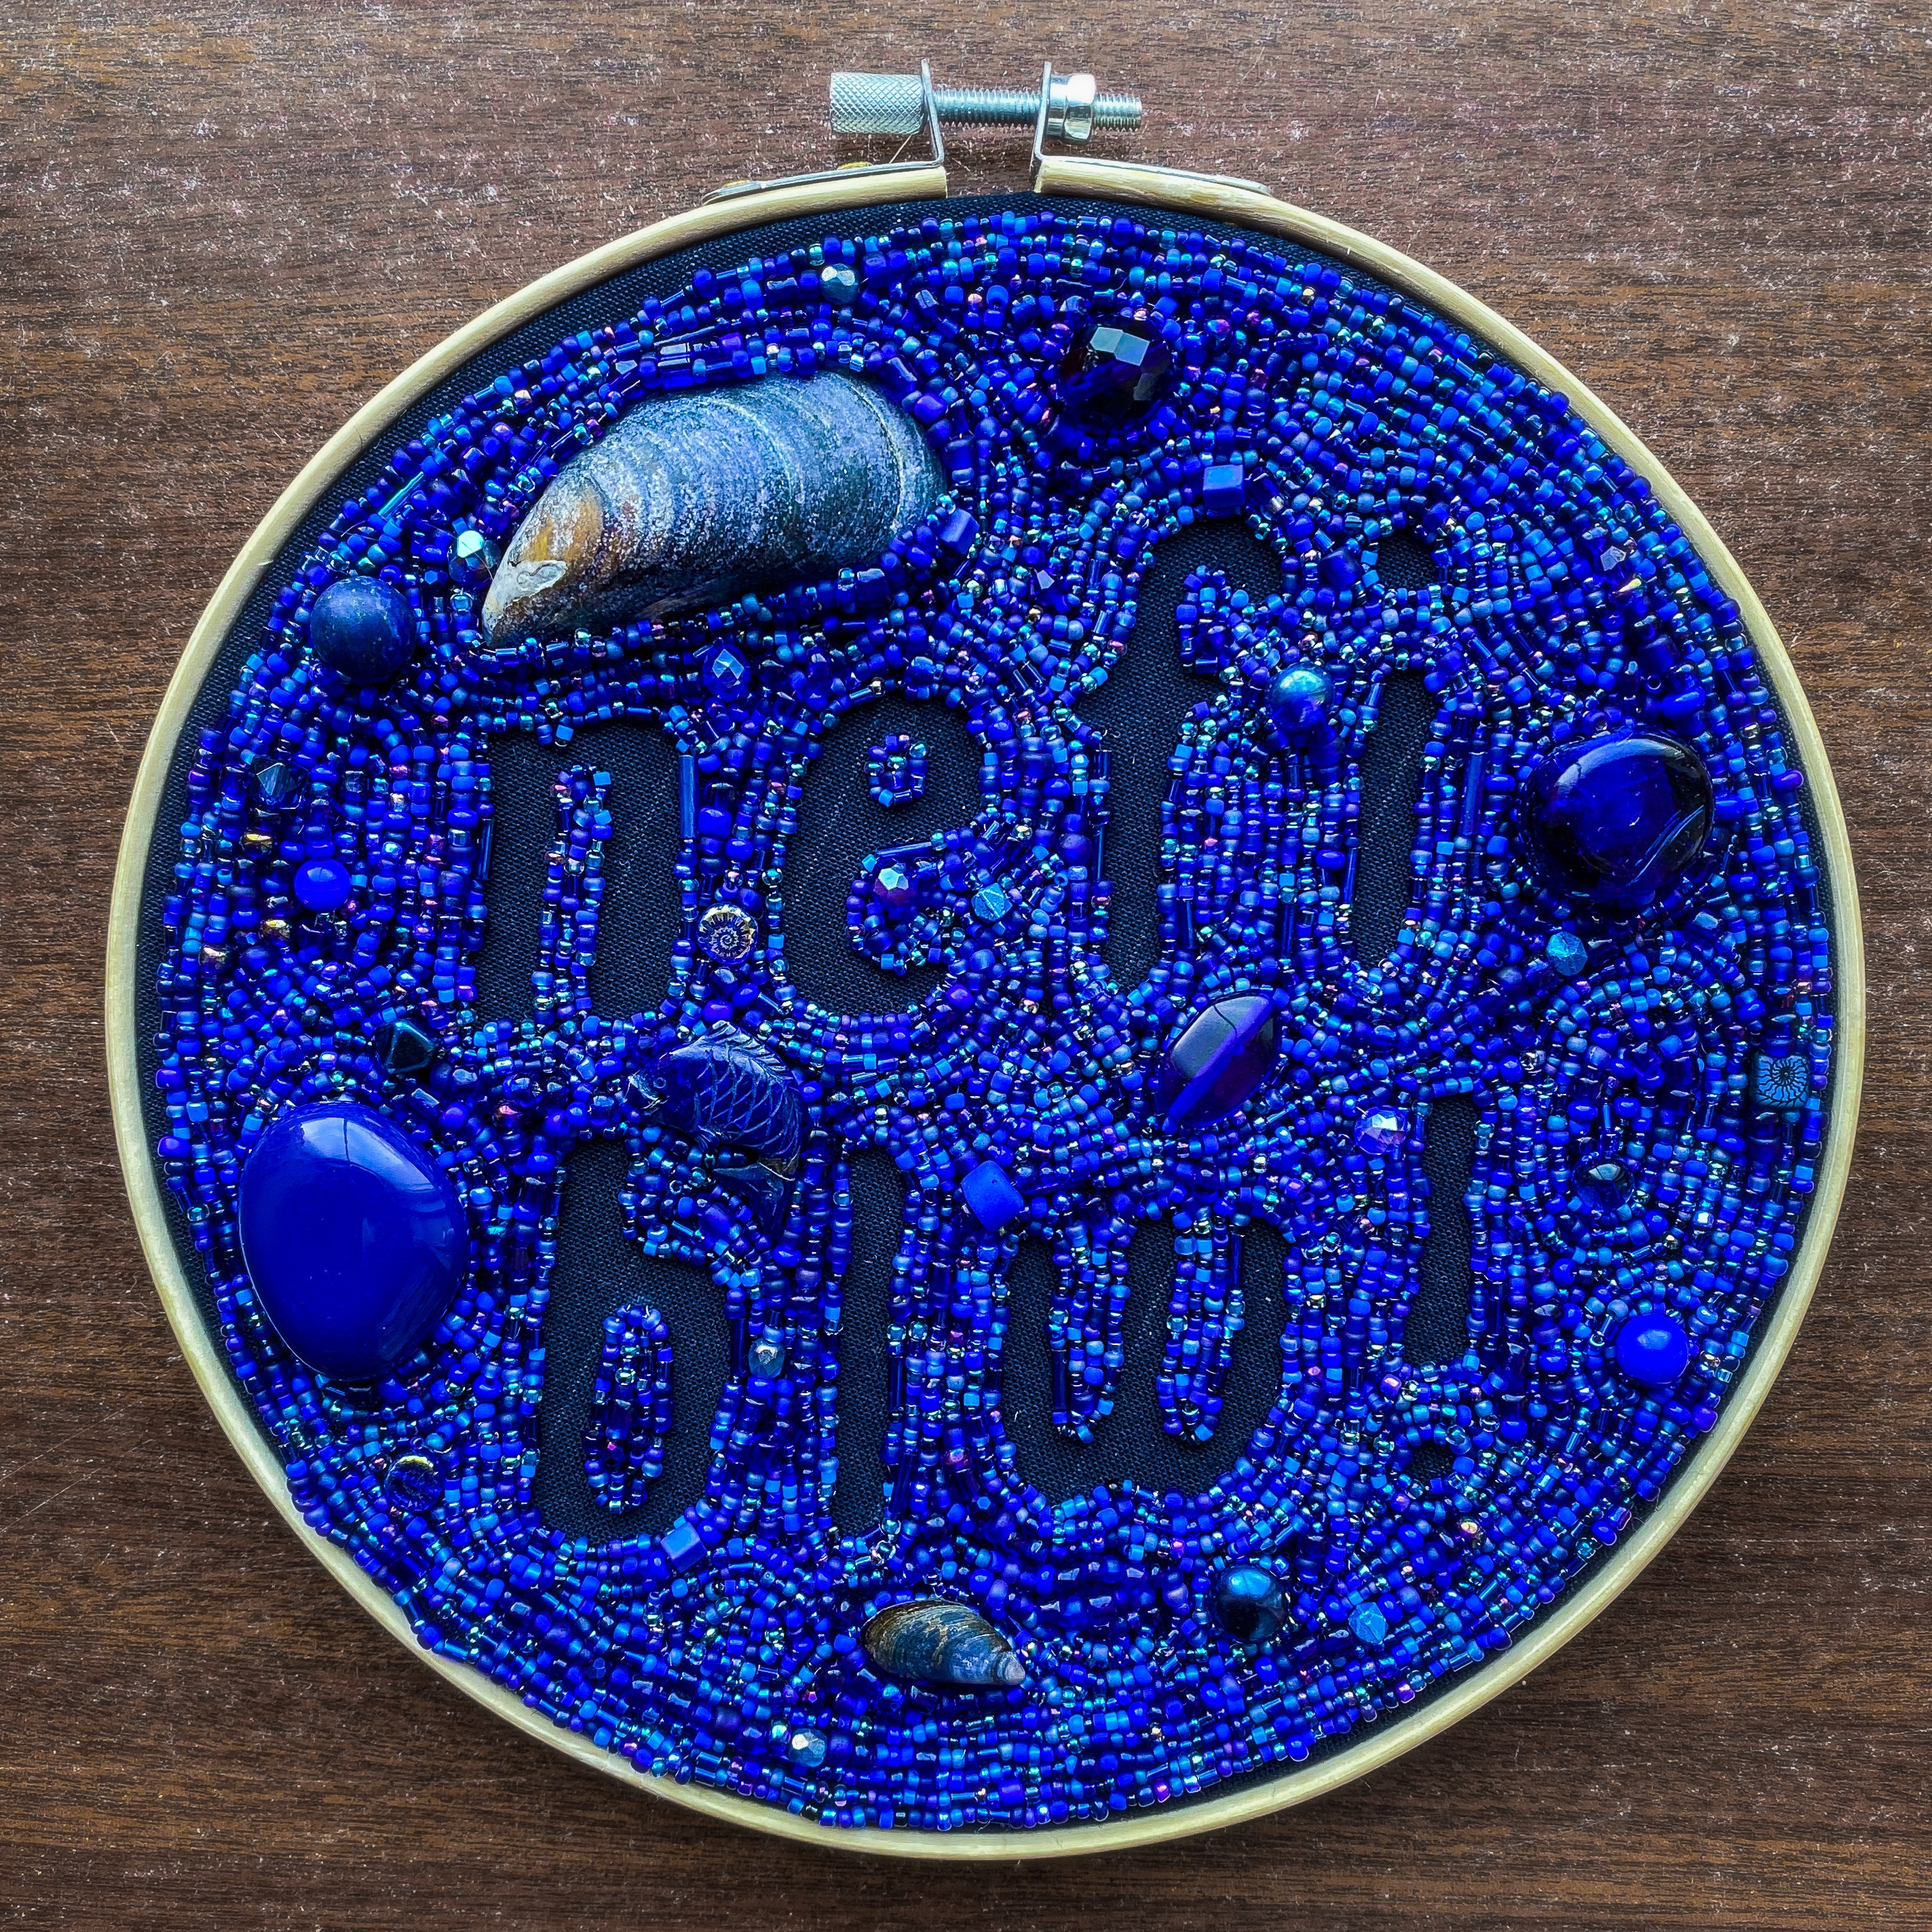 A round embroidery hoop containing a piece of navy blue fabric. The fabric is almost entirely covered with small beads and mussel shells, in various shades of dark blue. The spaces without beads form the Welsh words 'nefi blw'.